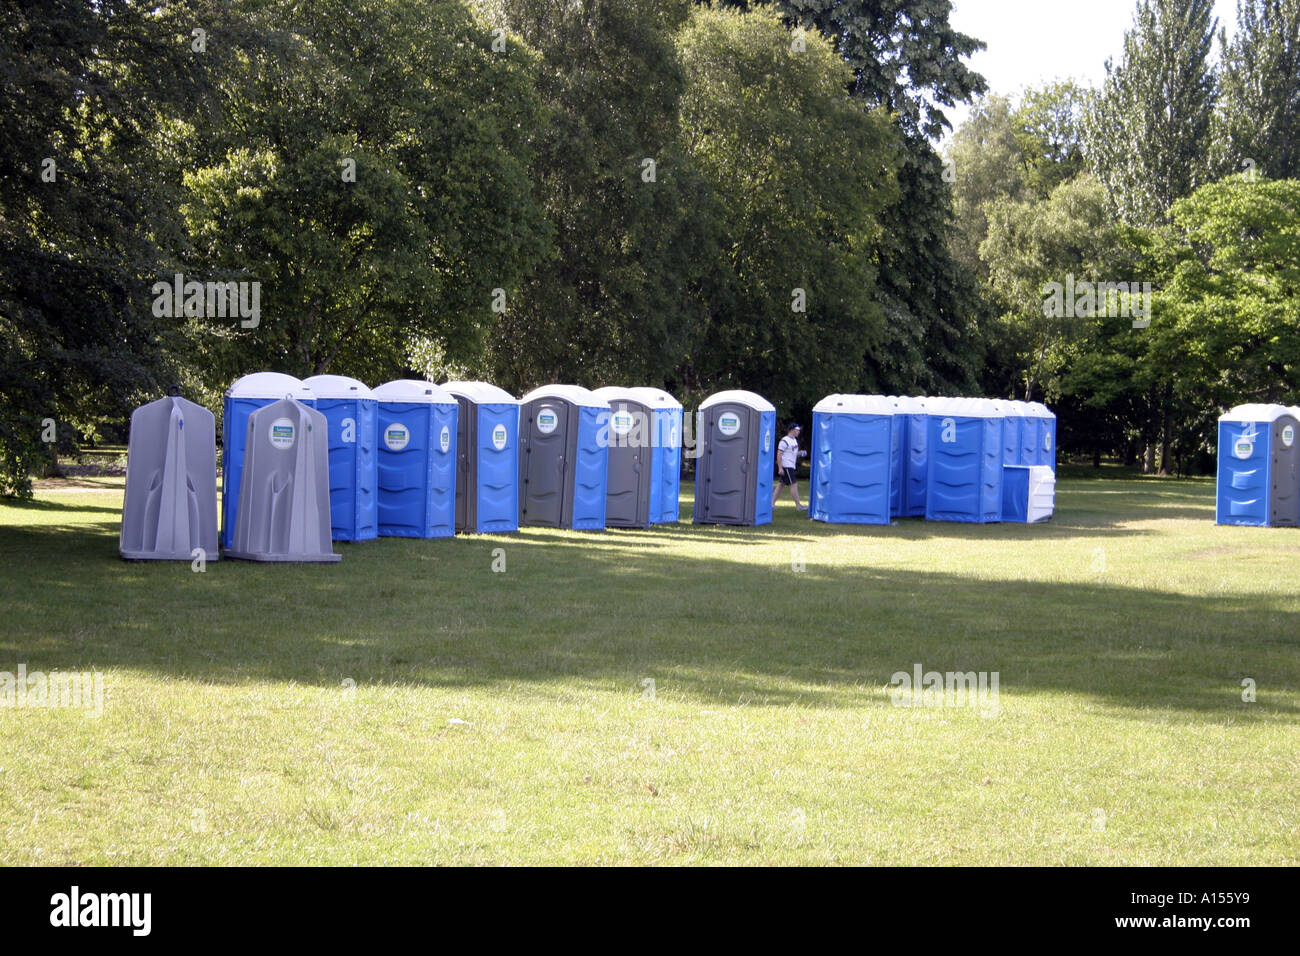 Loos ready to deploy at open air event Stock Photo